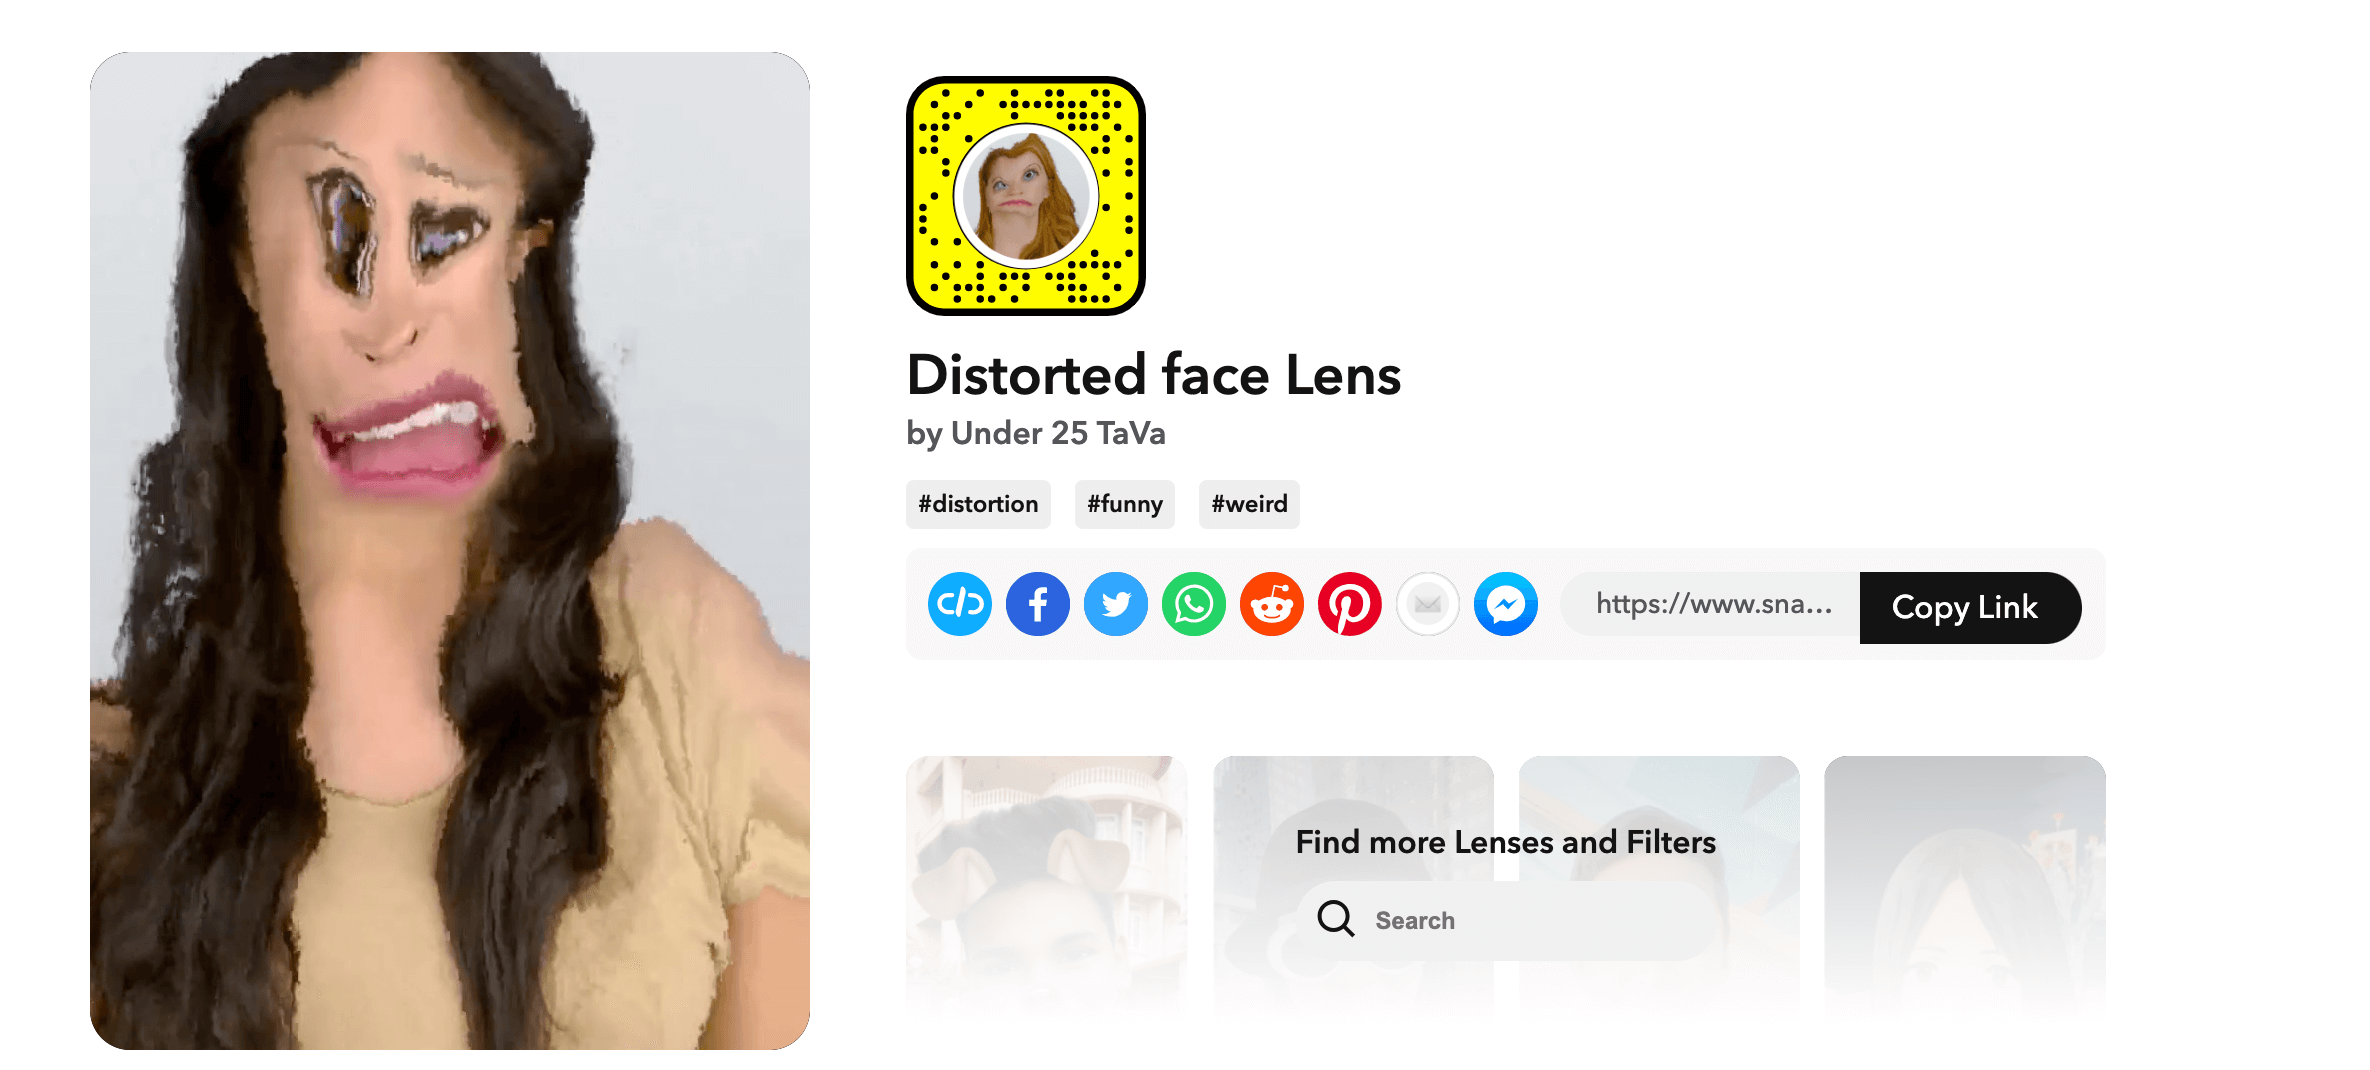 4 - distorted face lens